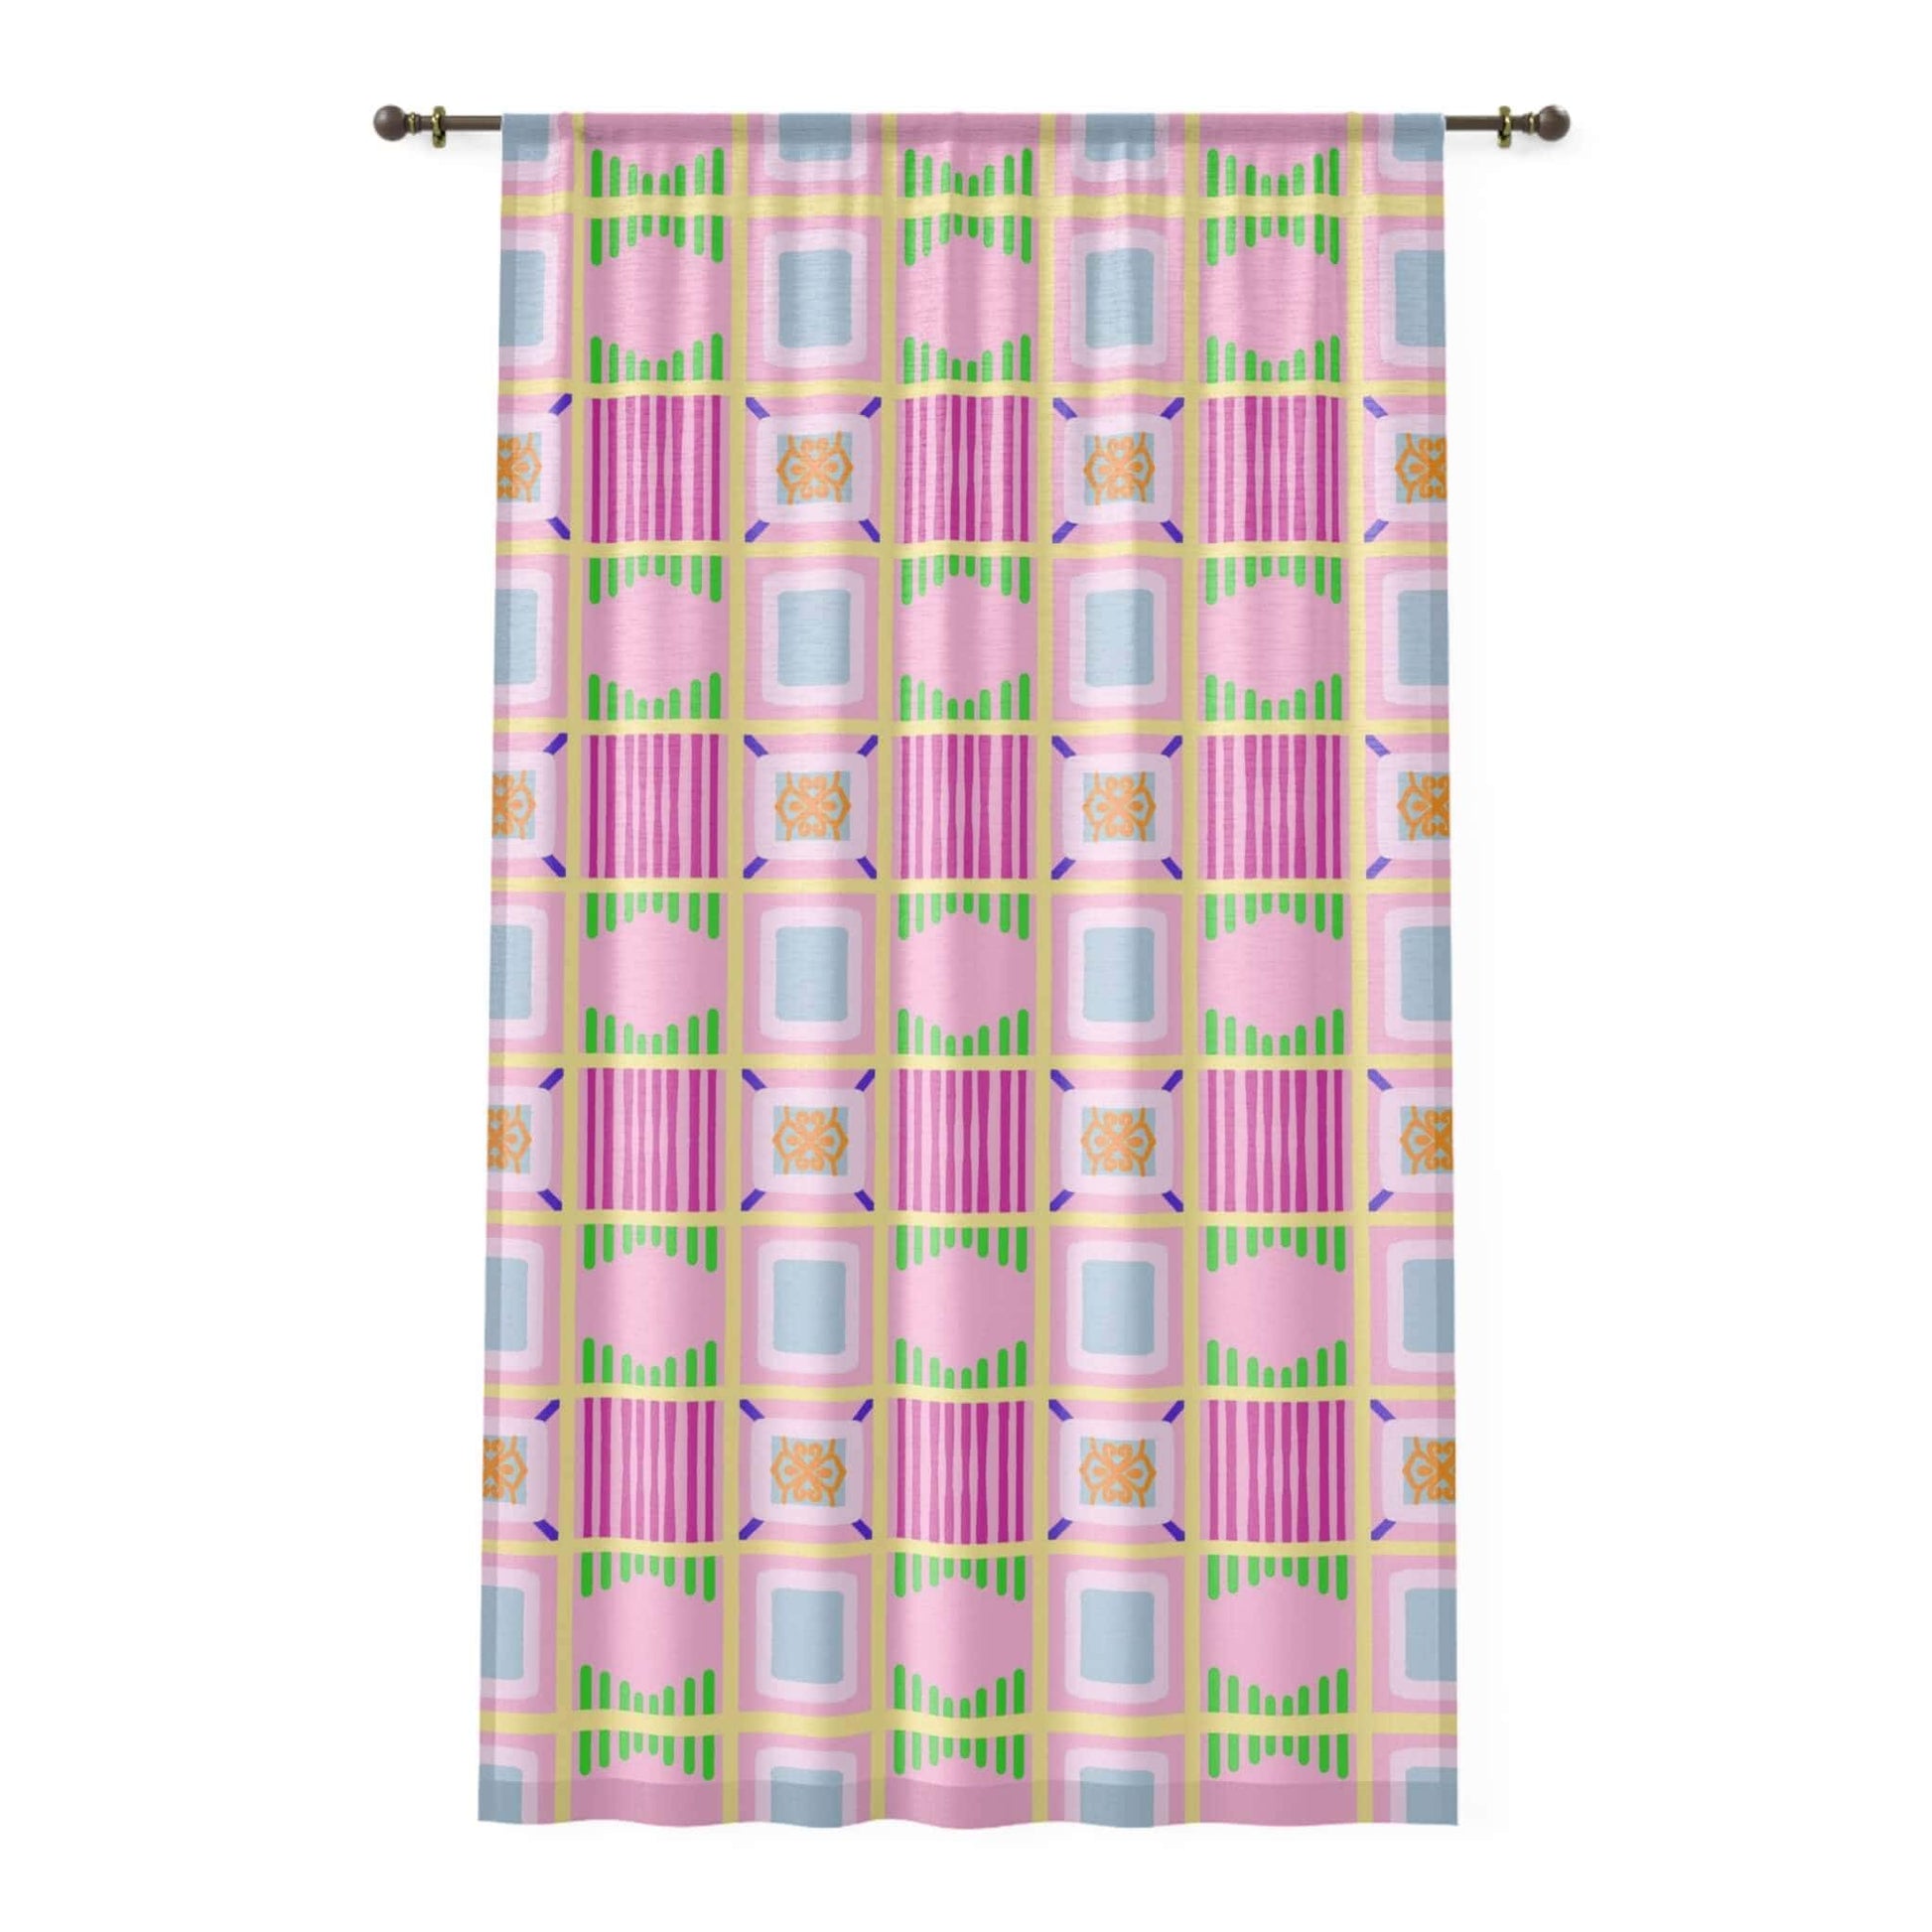 pink sheer curtains | oneowlartist.com